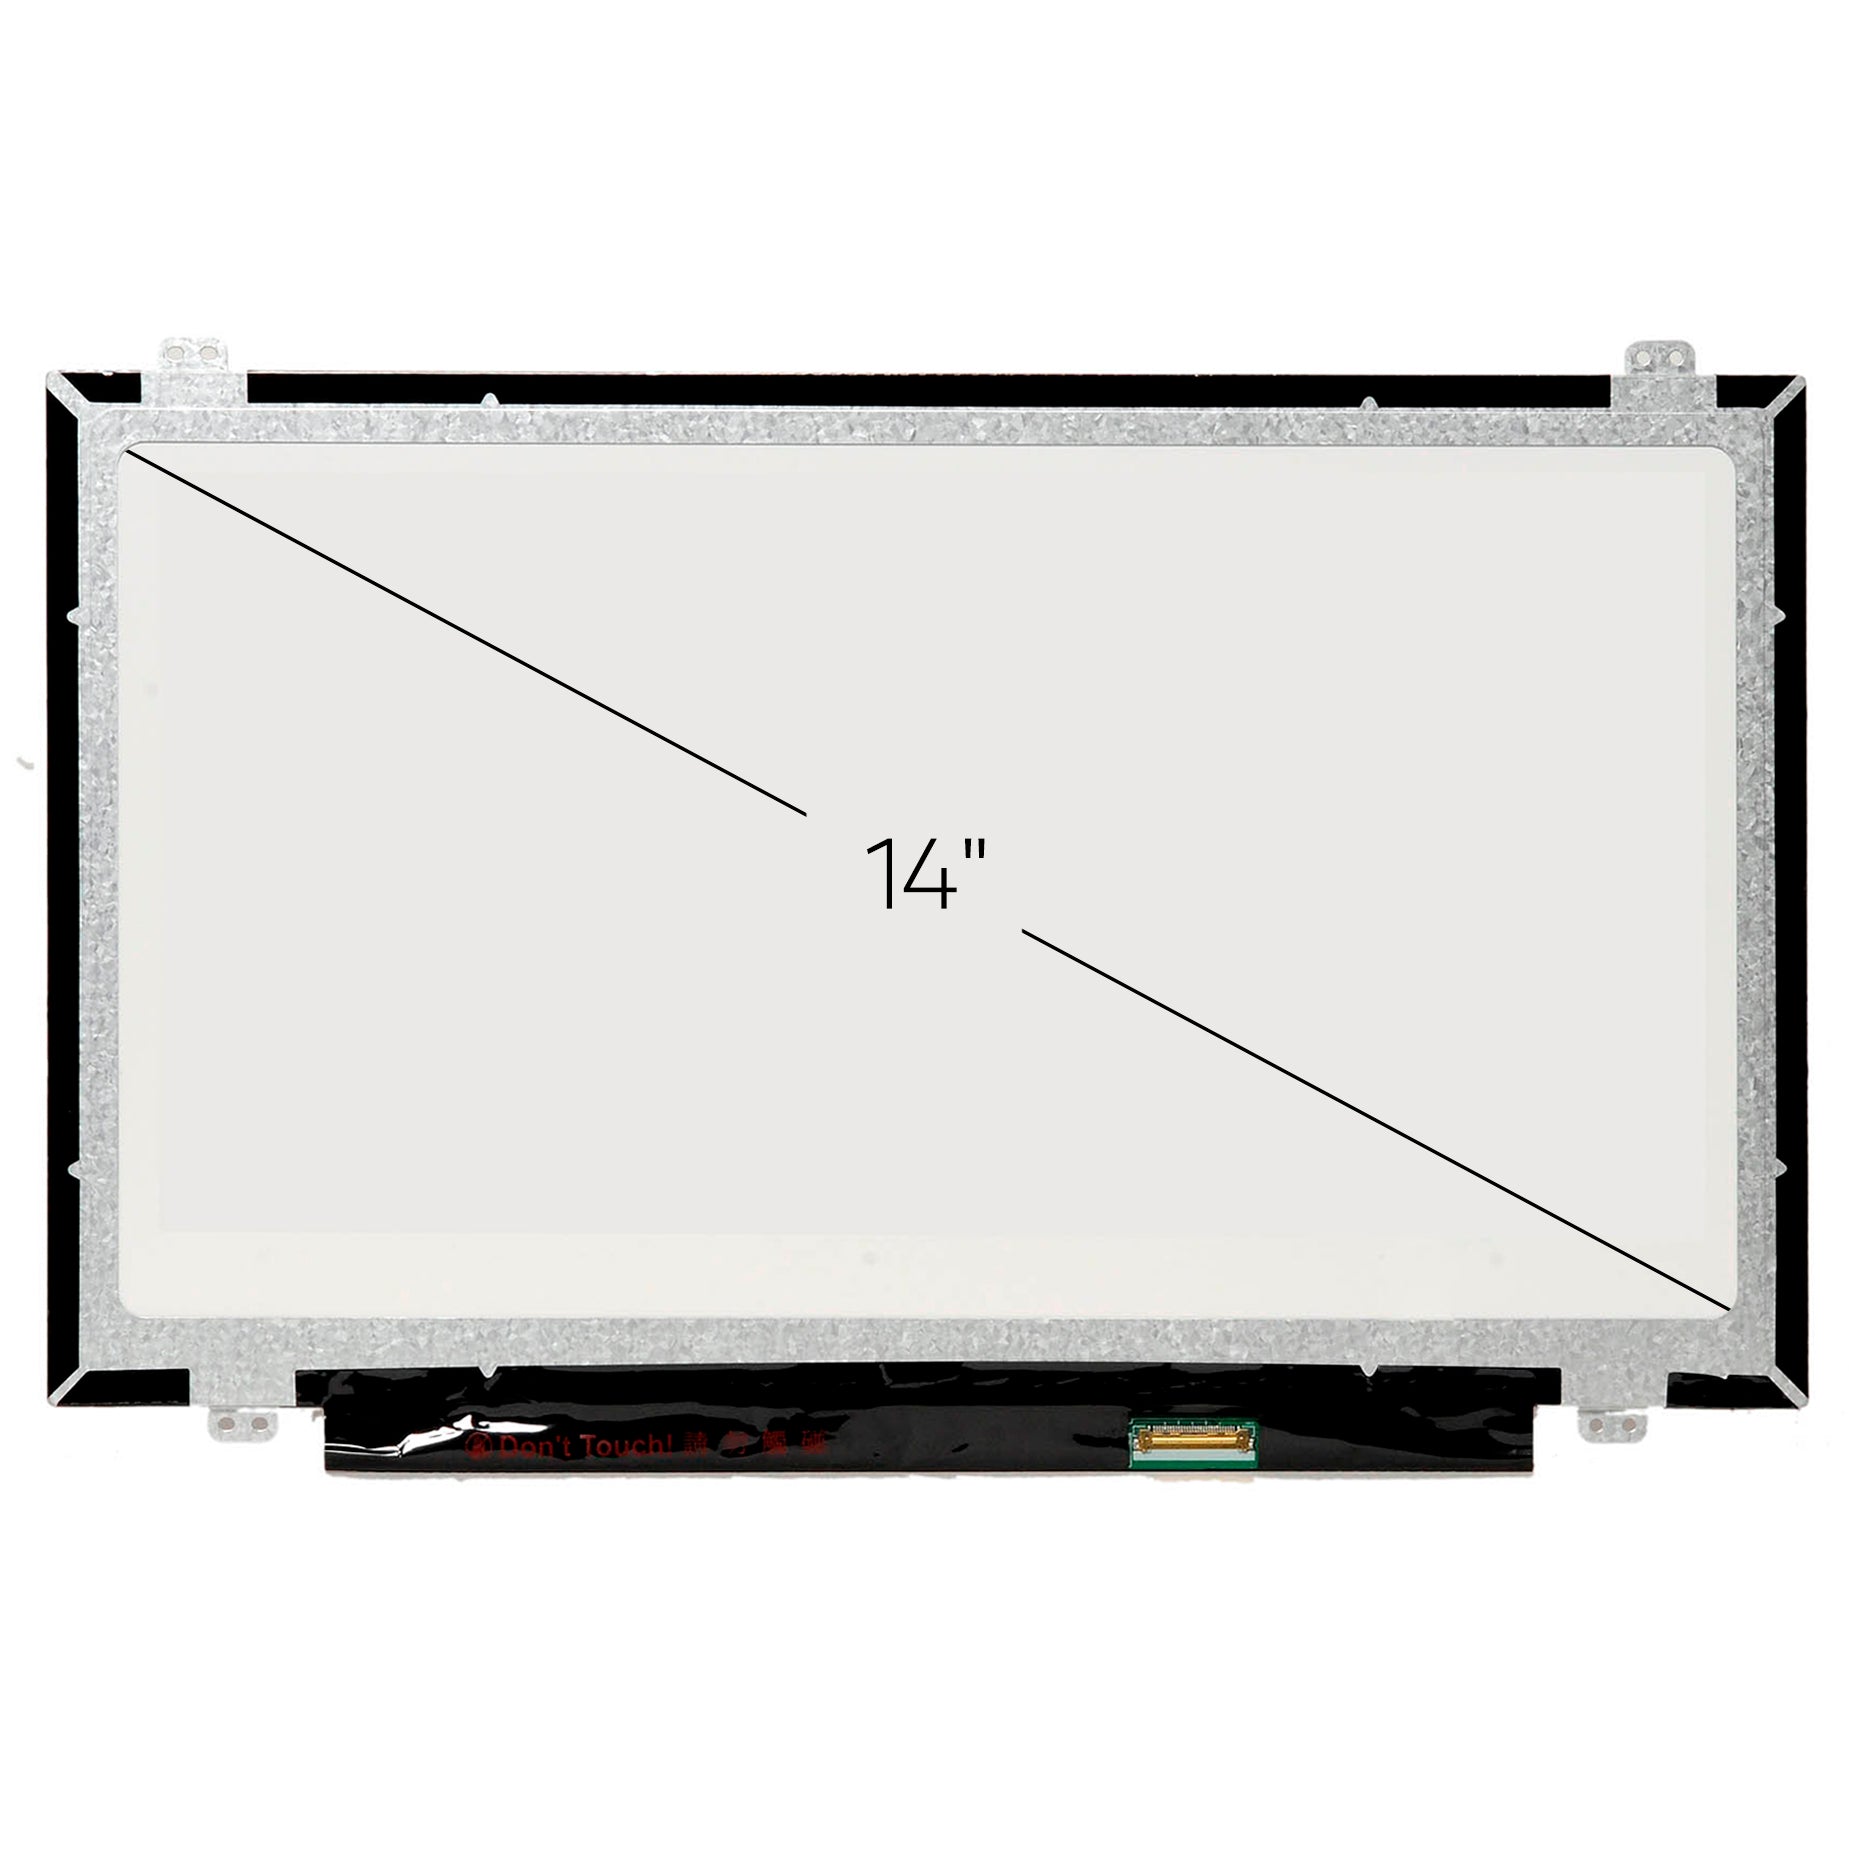 Screen Replacement for HP Probook 440 G2 HD 1366x768 Glossy LCD LED Display